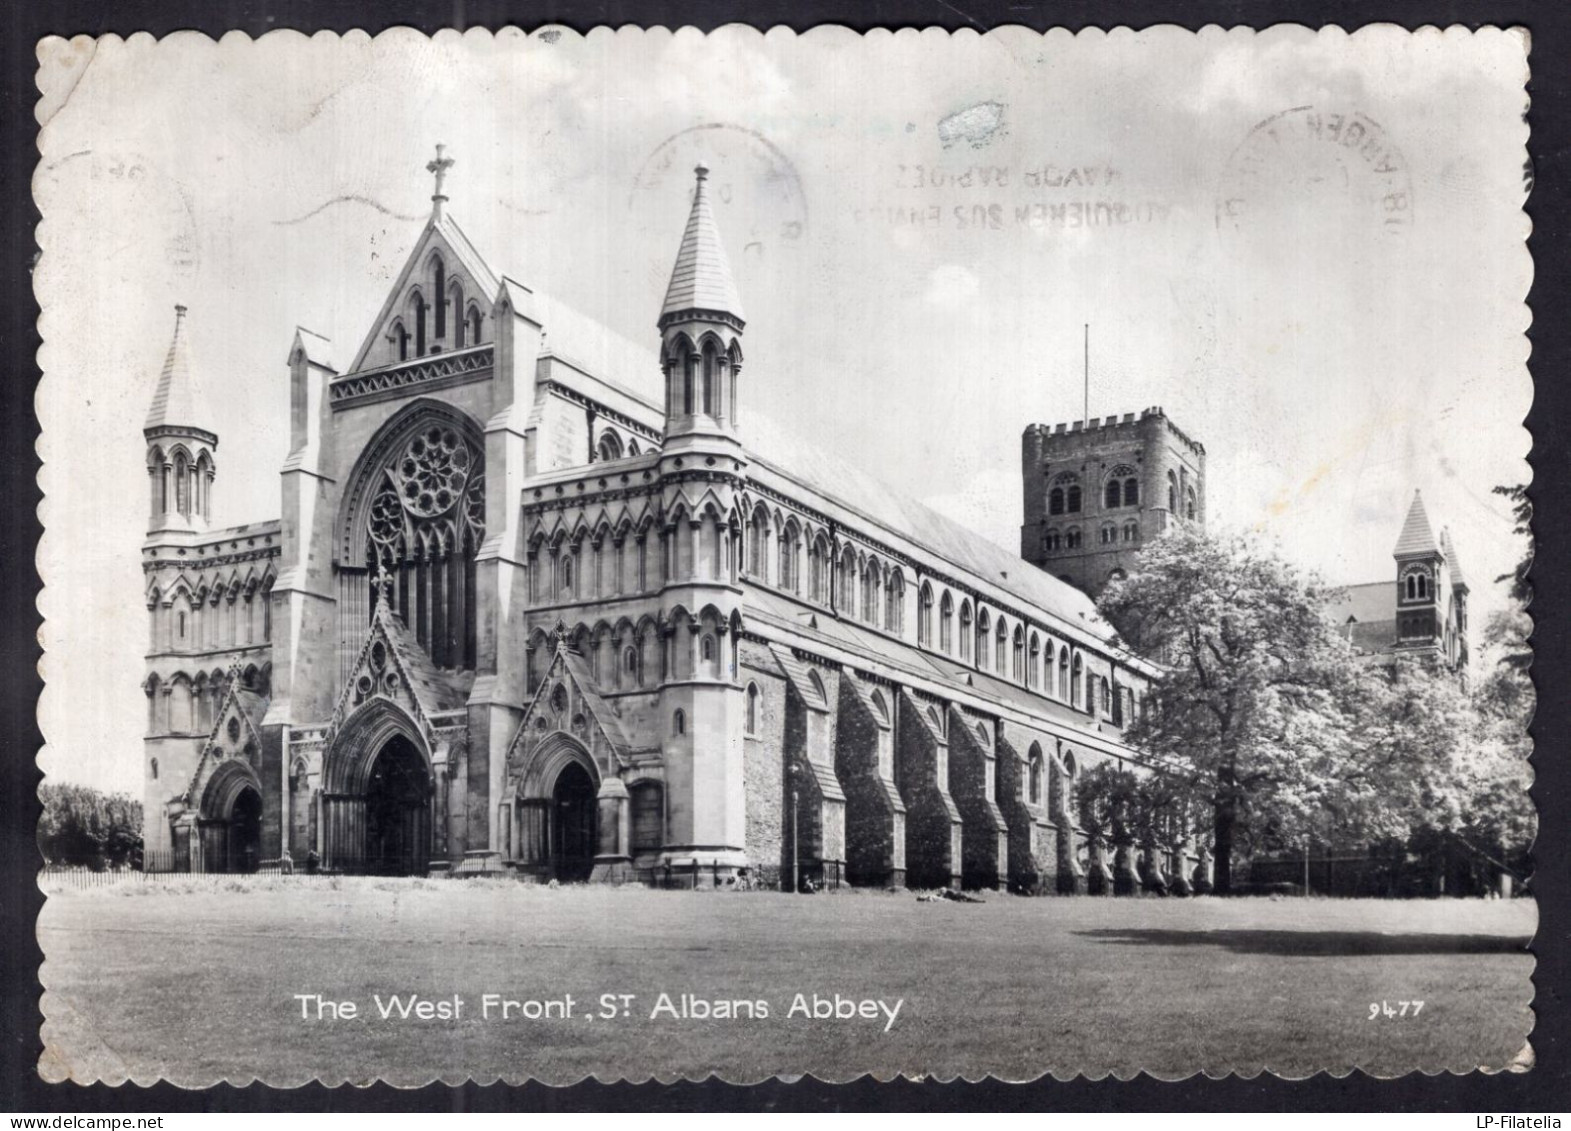 England - 1958 - St. Albans Abbey - The West Front - Hertfordshire